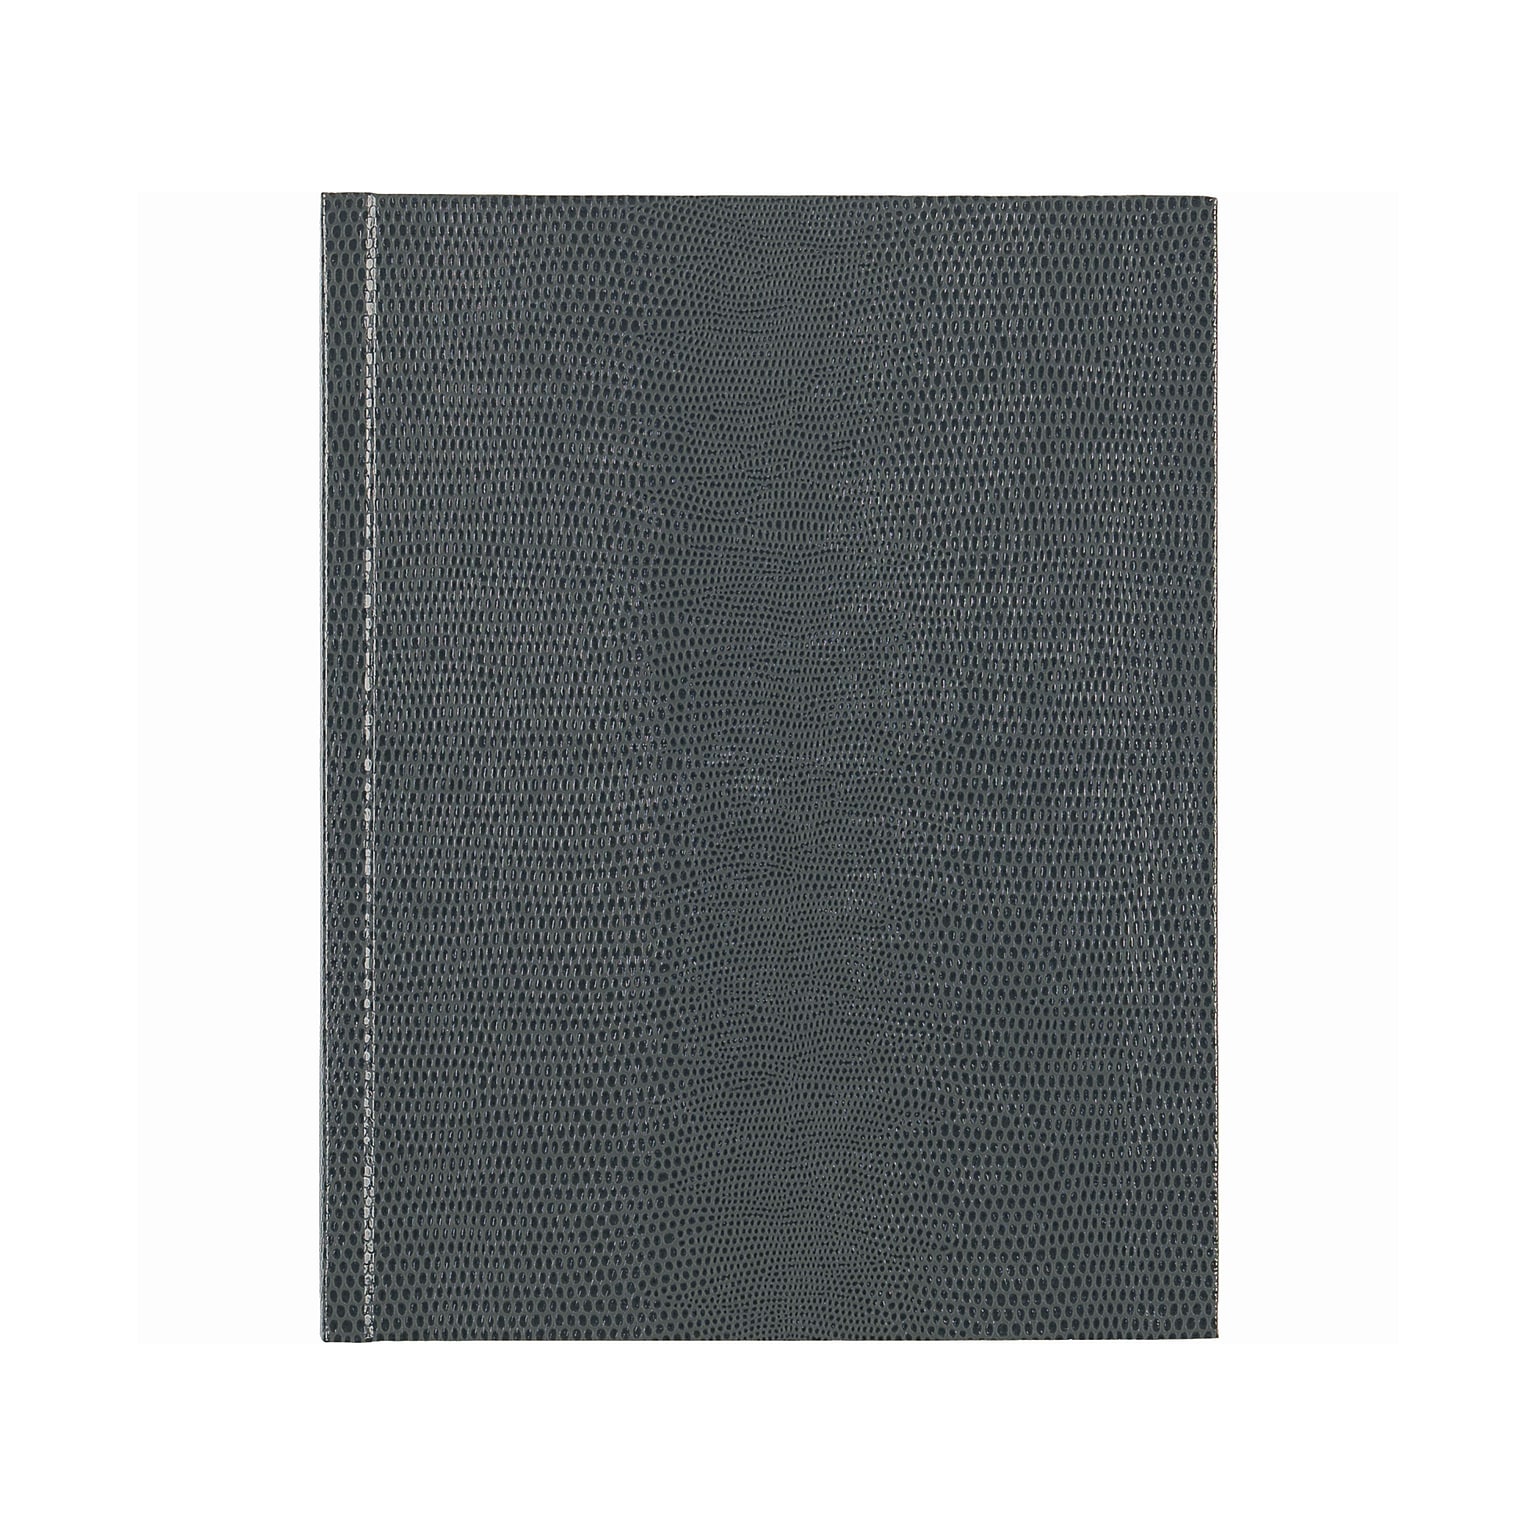 Blueline Hardcover Executive Journal, 7.25 x 9.25, Wide-Ruled, Cool Gray, 144 Pages (A7.GRY)